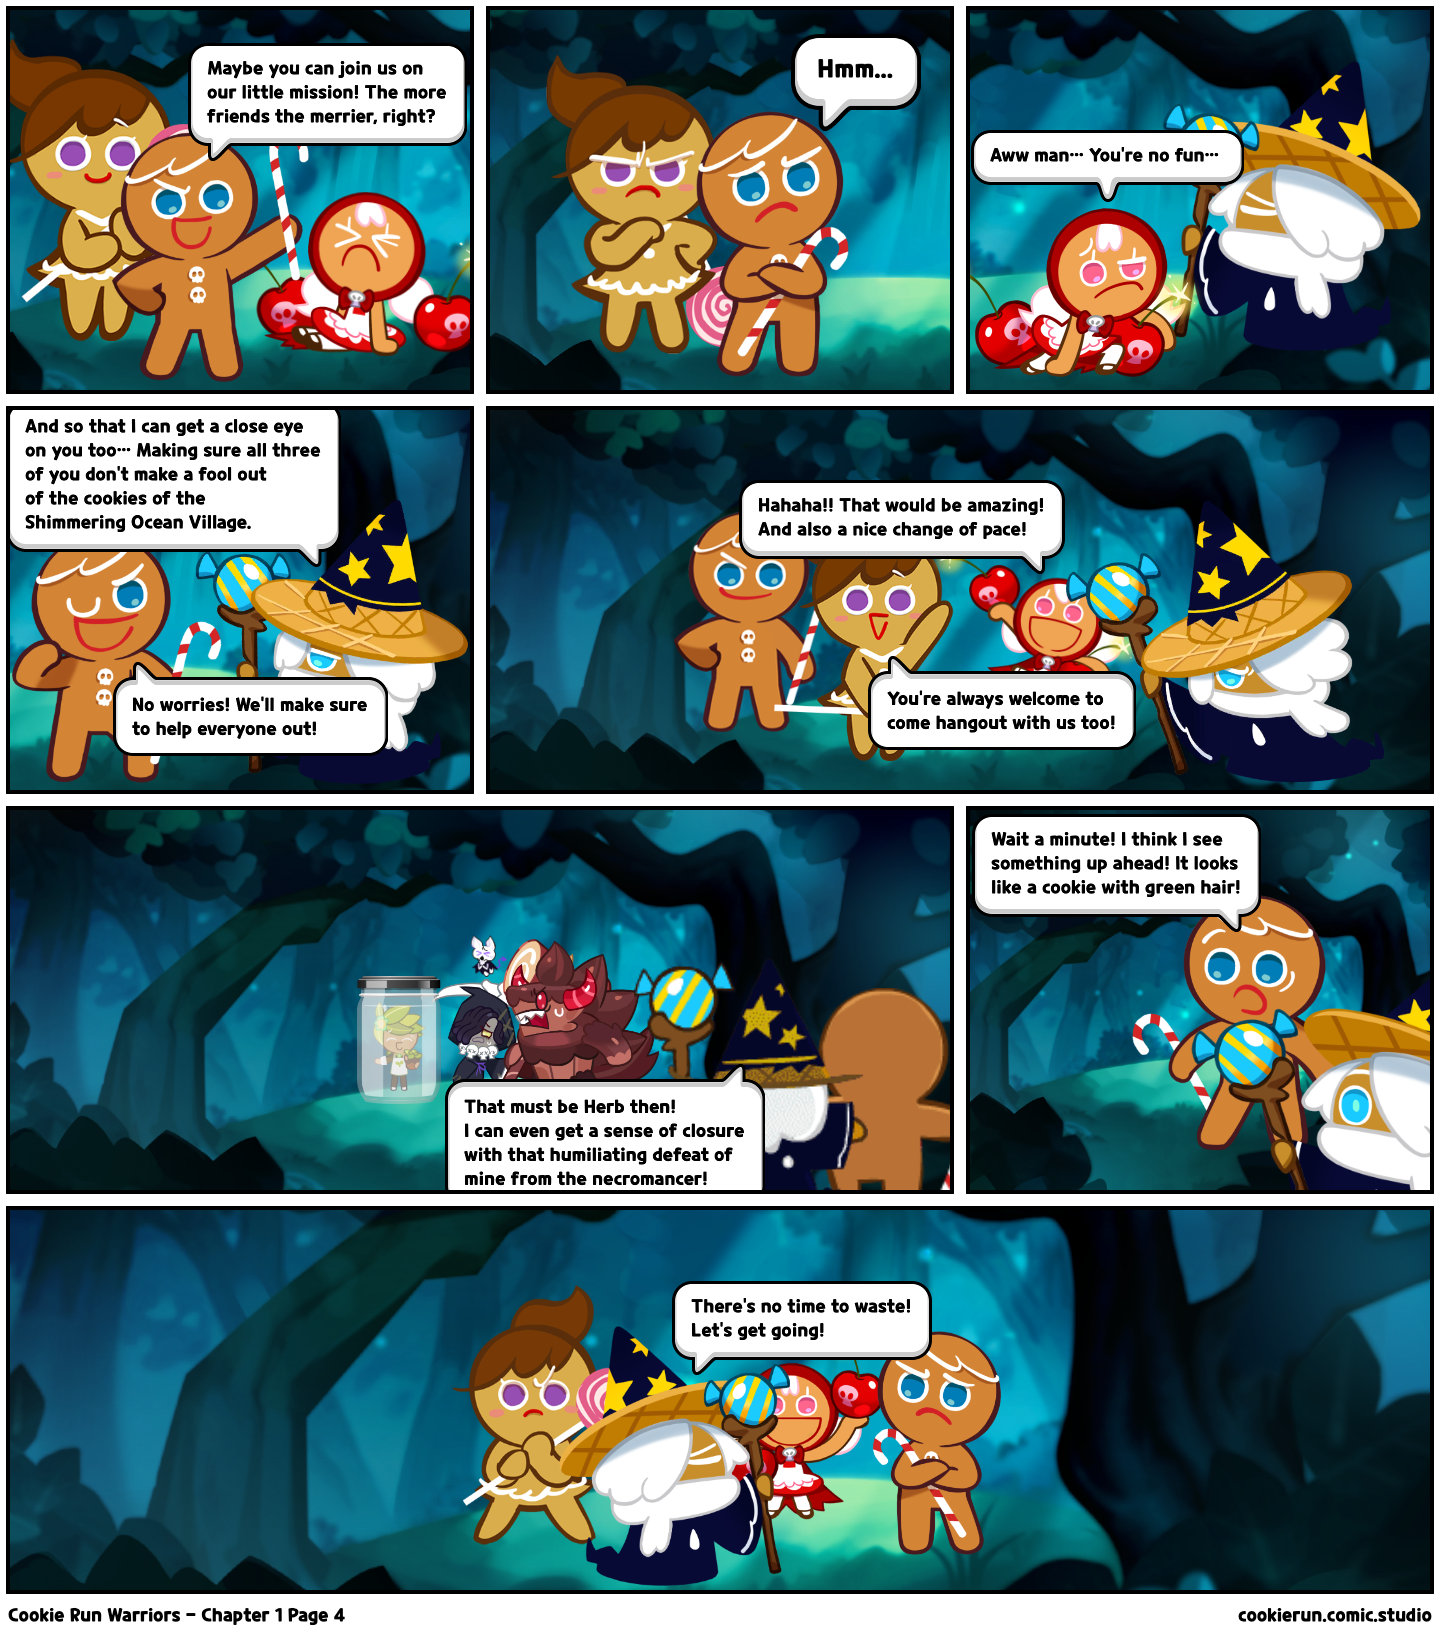 Cookie Run Warriors - Chapter 1 Page 4